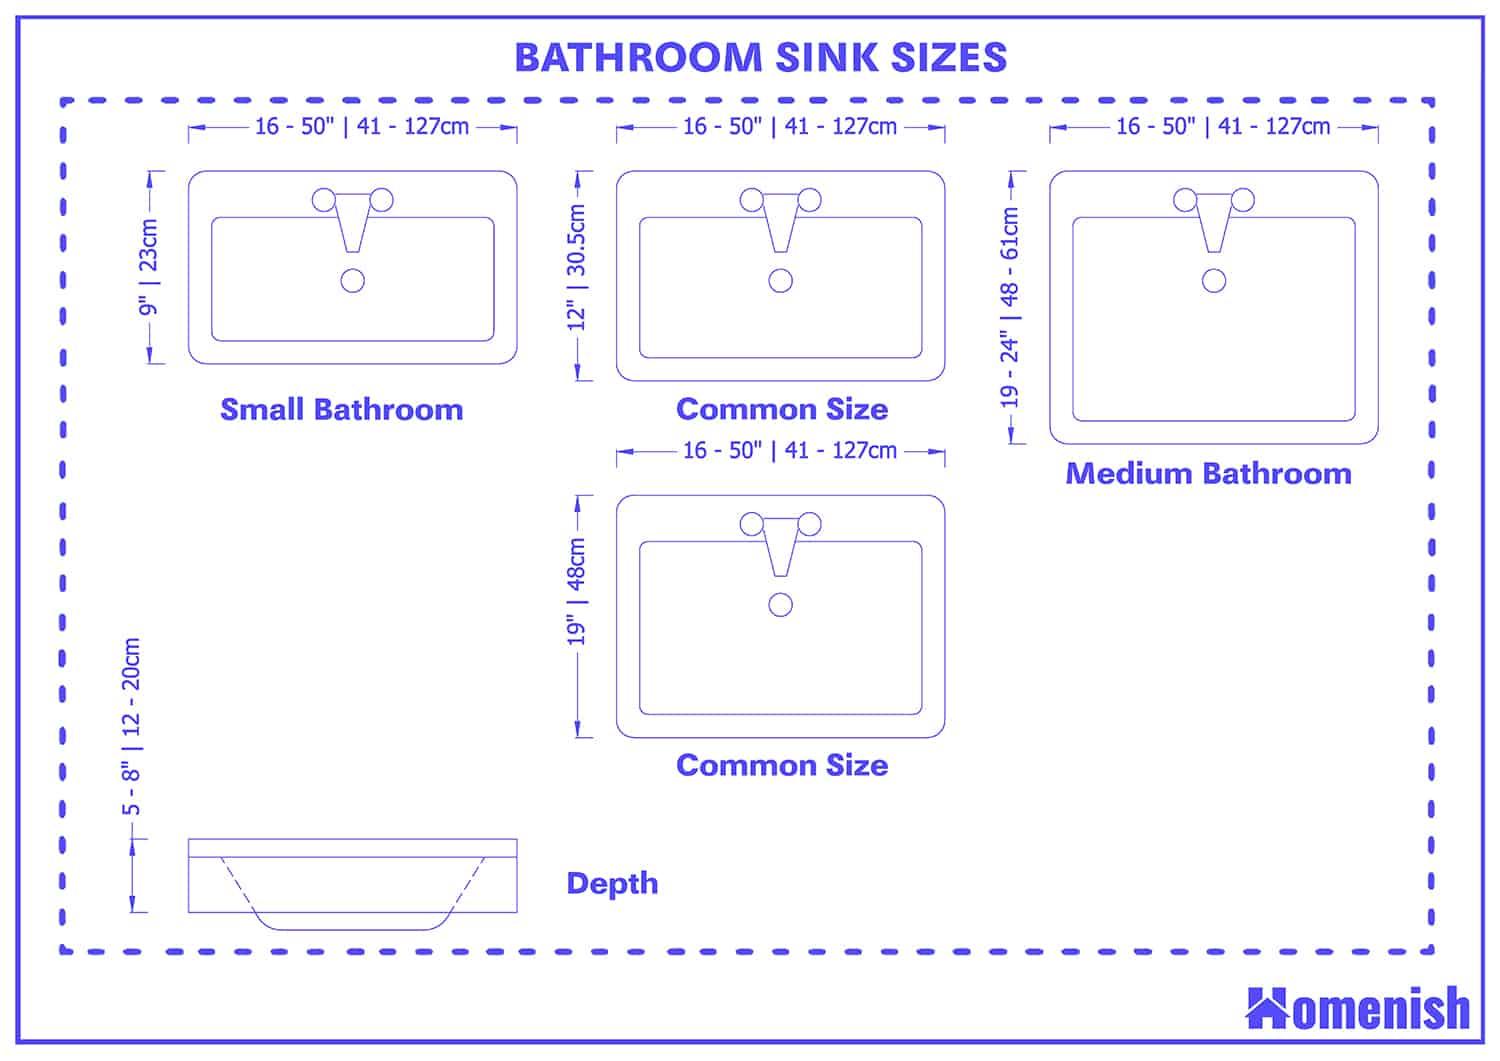 standard copper pipe size for bathroom sink